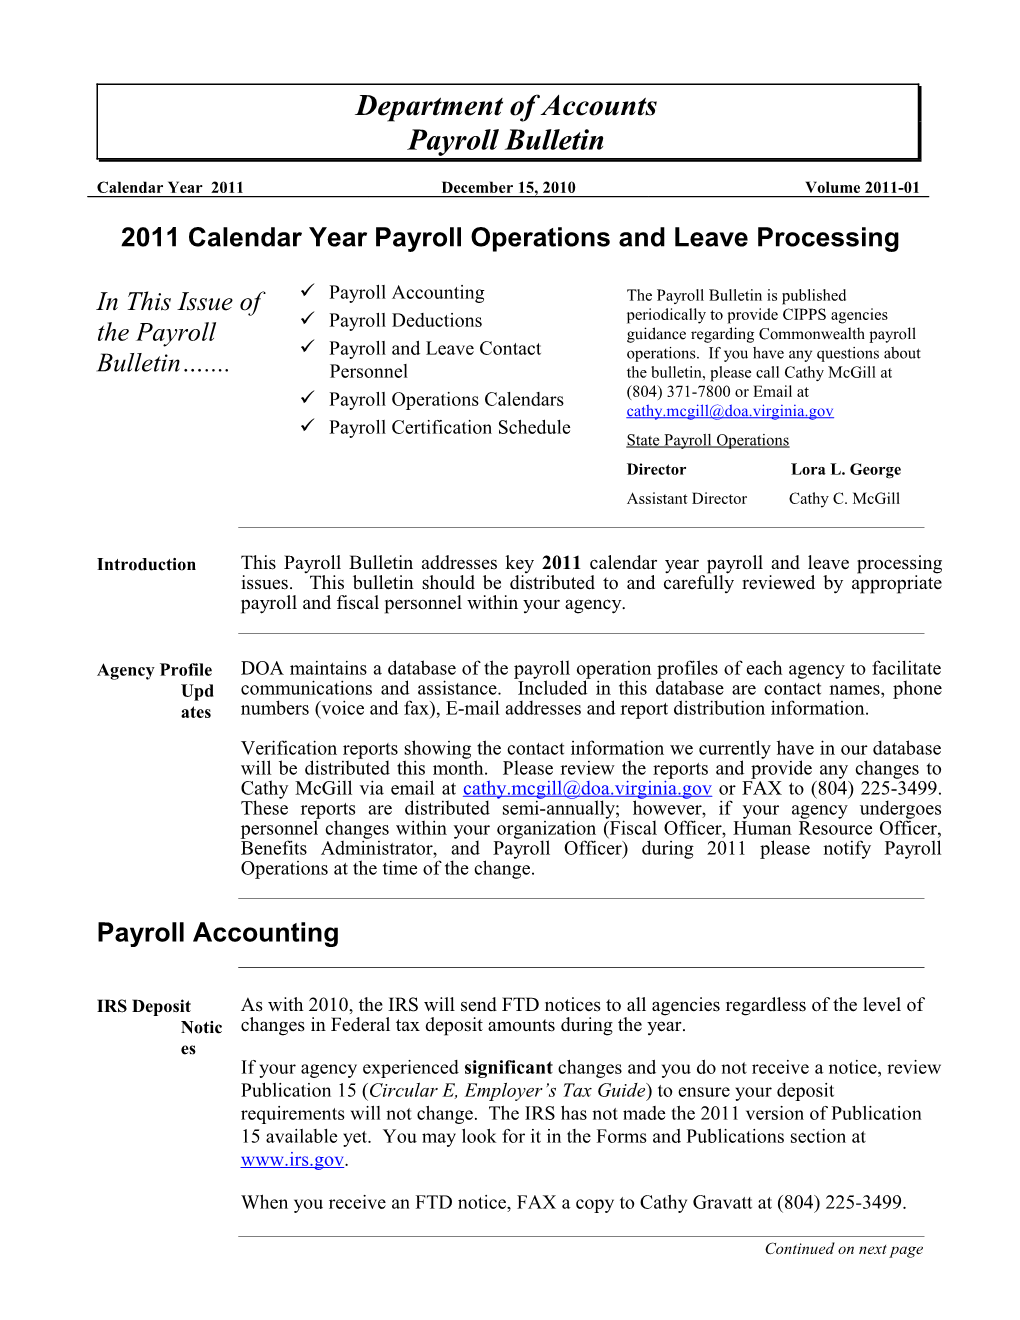 2011 Calendar Year Payroll Operations and Leave Processing